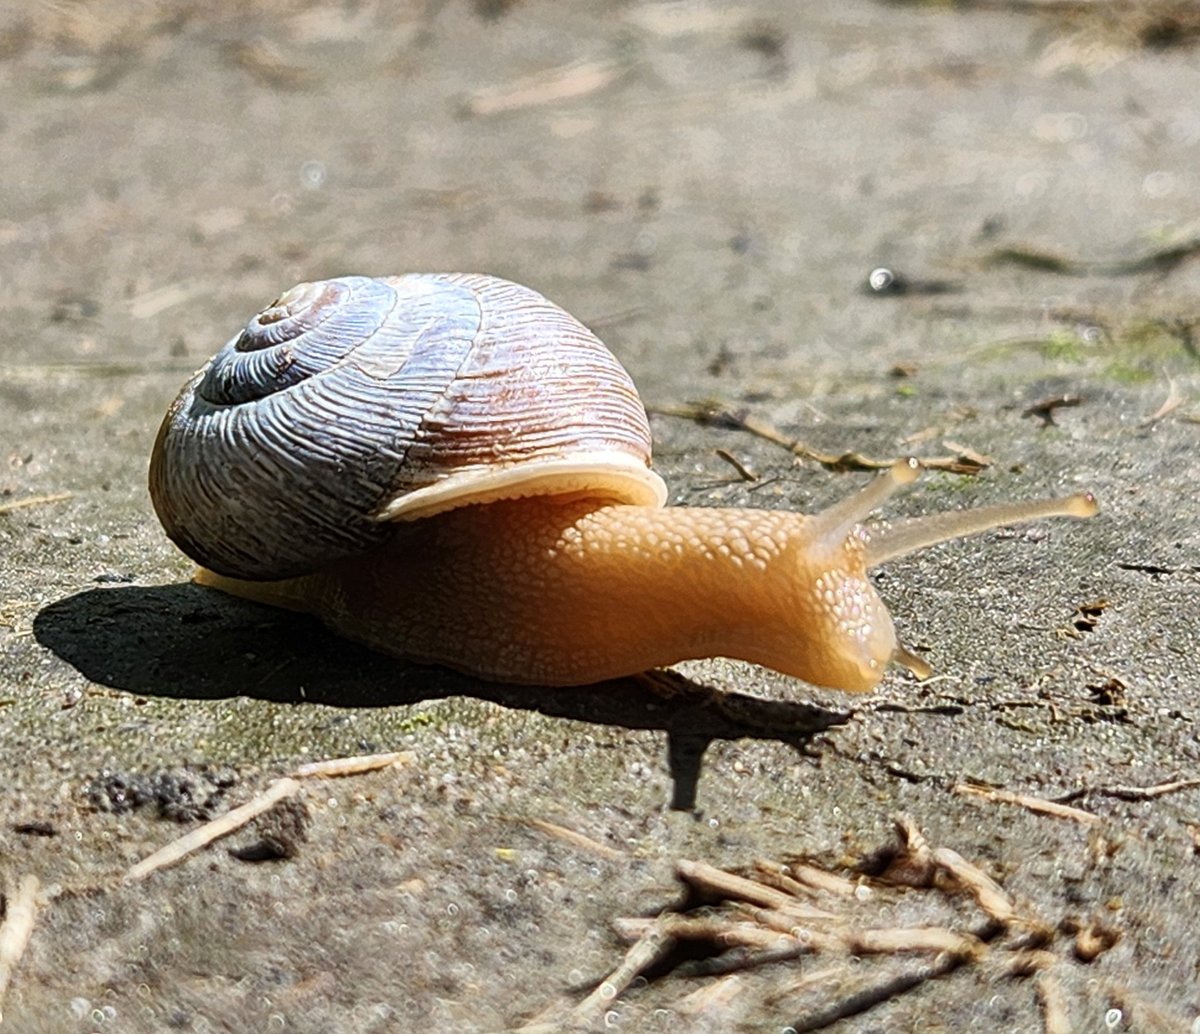 This guy is moving so slow he's not even leaving a snail trail. #snail #SandyRiverDelta #ColumbiaGorge #ColumbiaRiver #Portland  #PNW #PacificNorthWest #Oregon #westLinn

#Keeponmoving #onefootinfrontoftheother #findyourhappyplace #geocaching #hiking #nature #heavenonearth